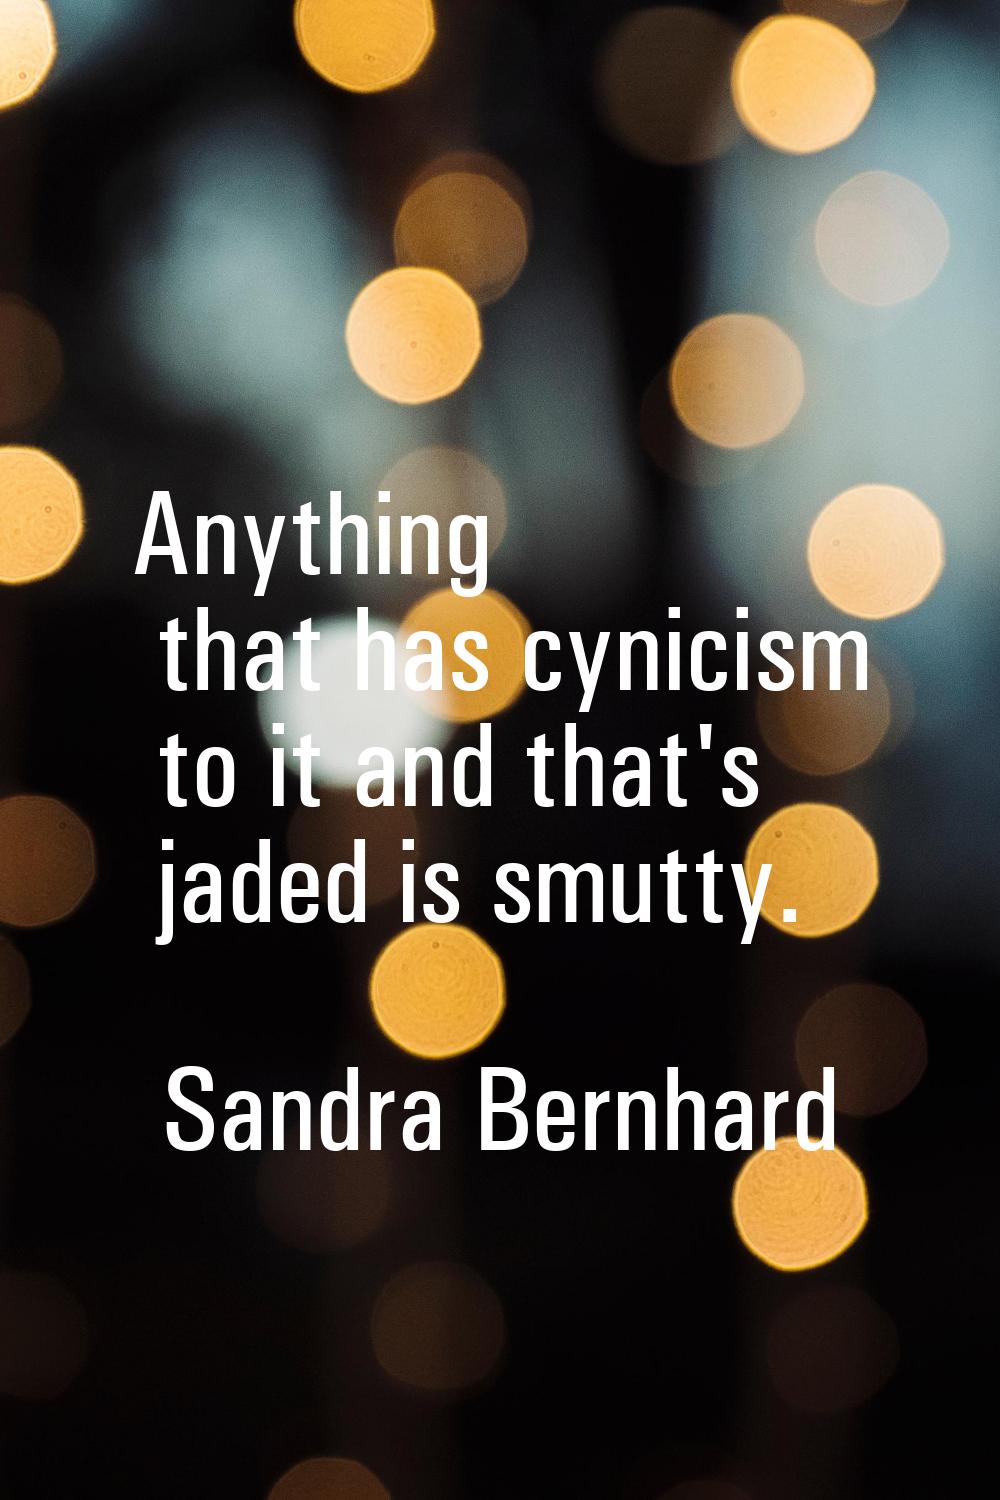 Anything that has cynicism to it and that's jaded is smutty.